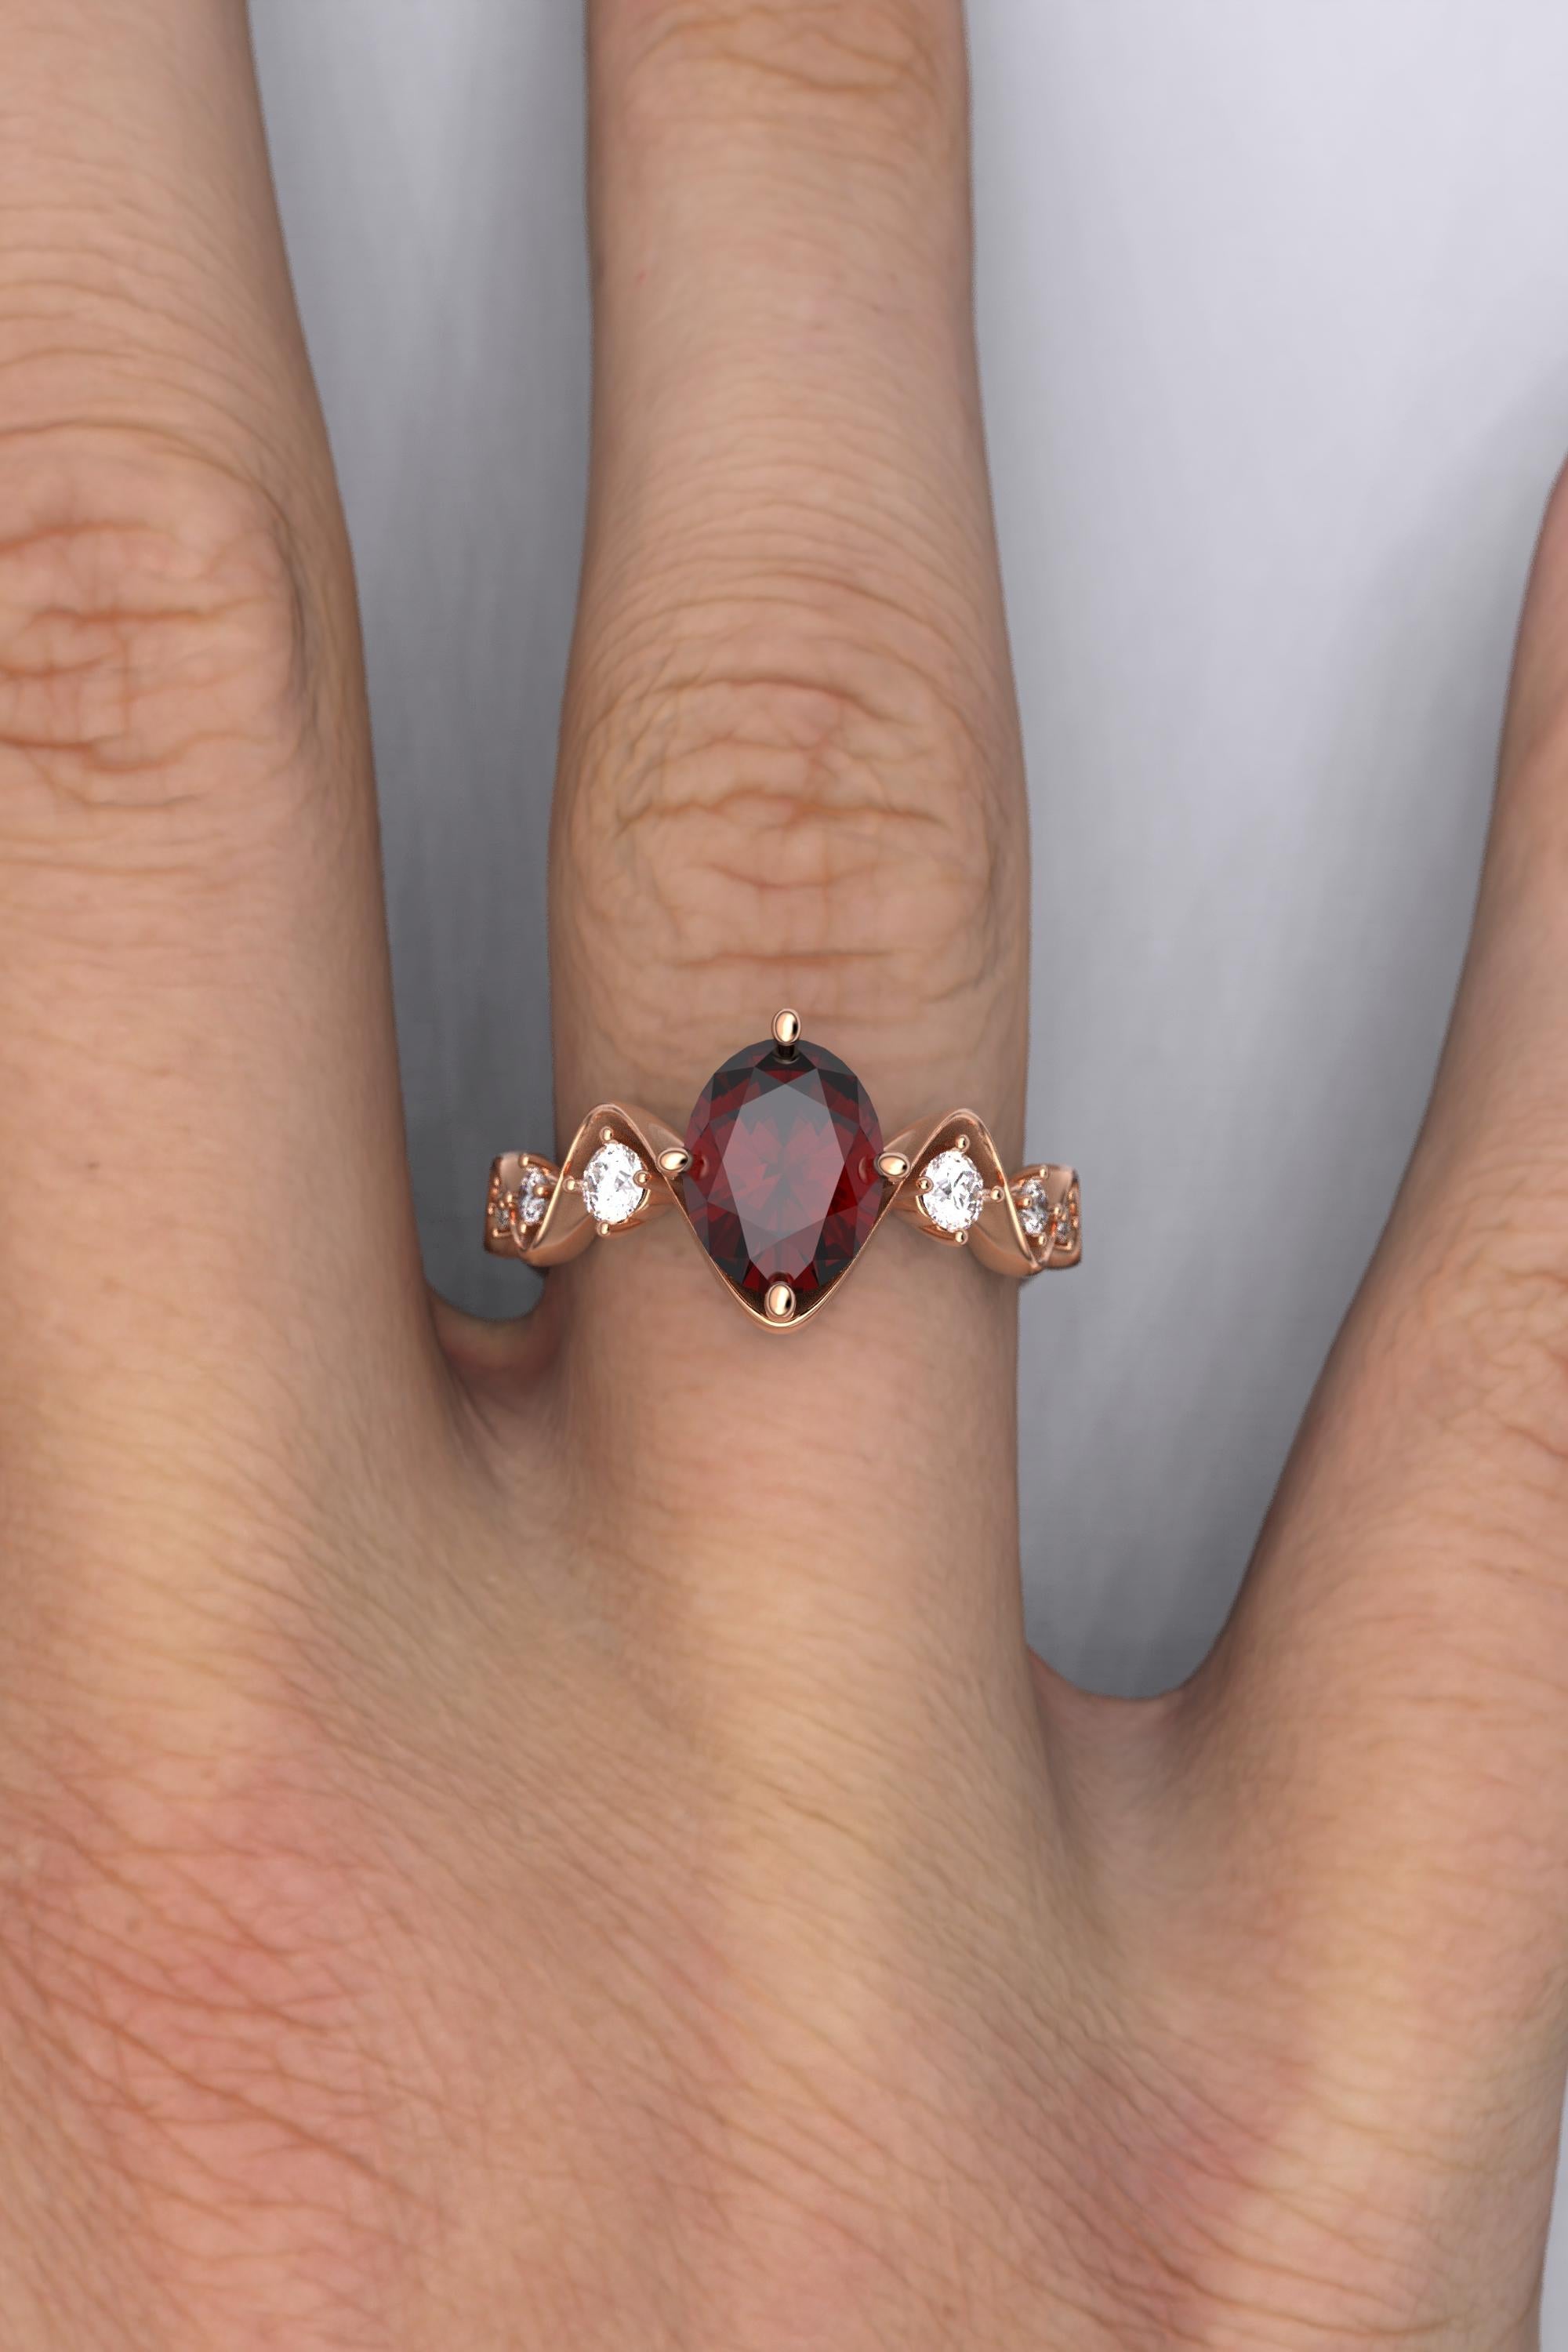 For Sale:  Garnet and Diamonds Engagement Ring Made in Italy by Oltremare Gioielli 18k Gold 5